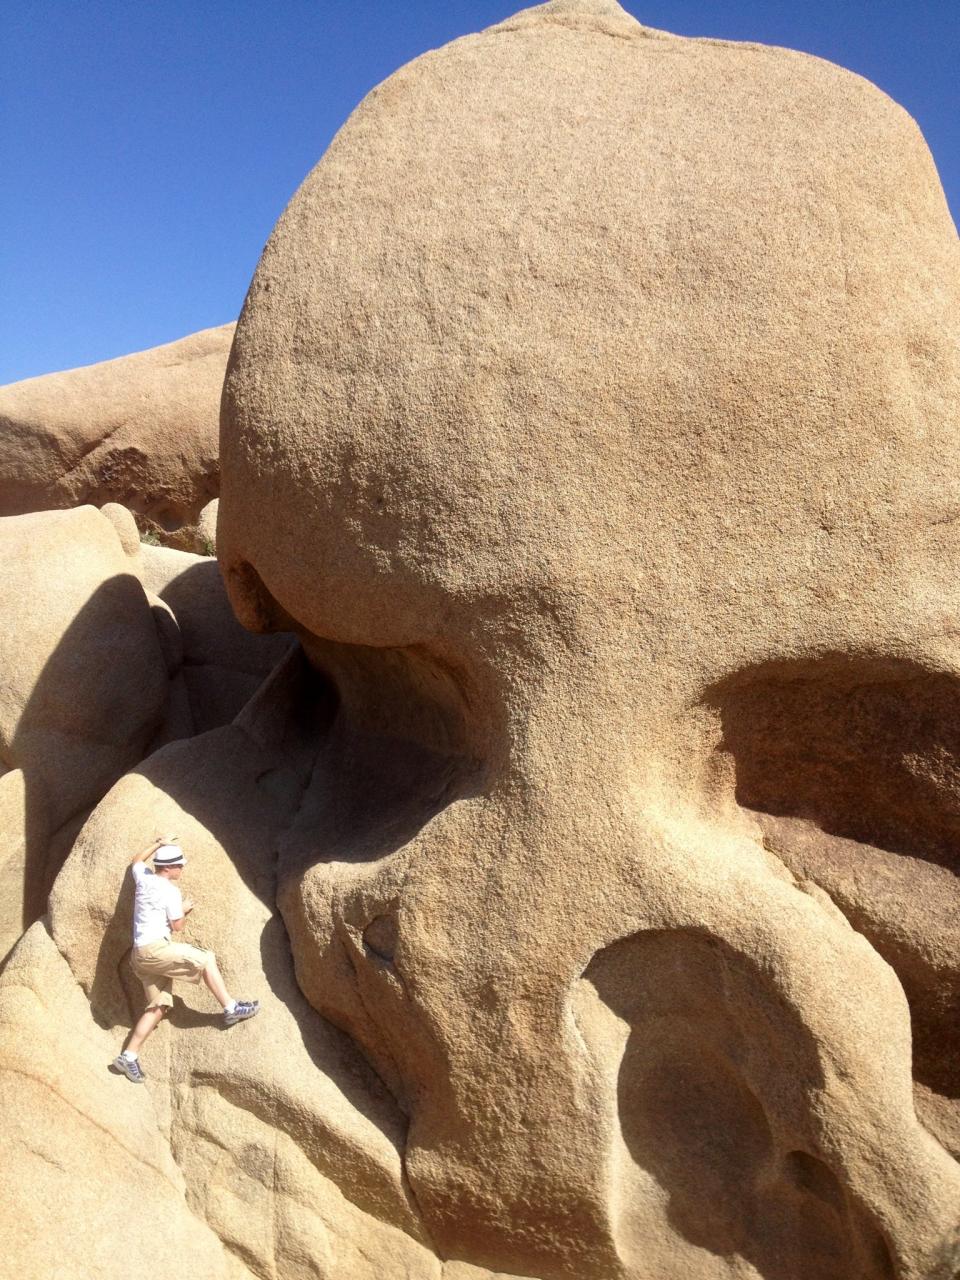 
The aptly named Skull Rock dwarfs a visitor in May at Joshua Tree National Park. 
